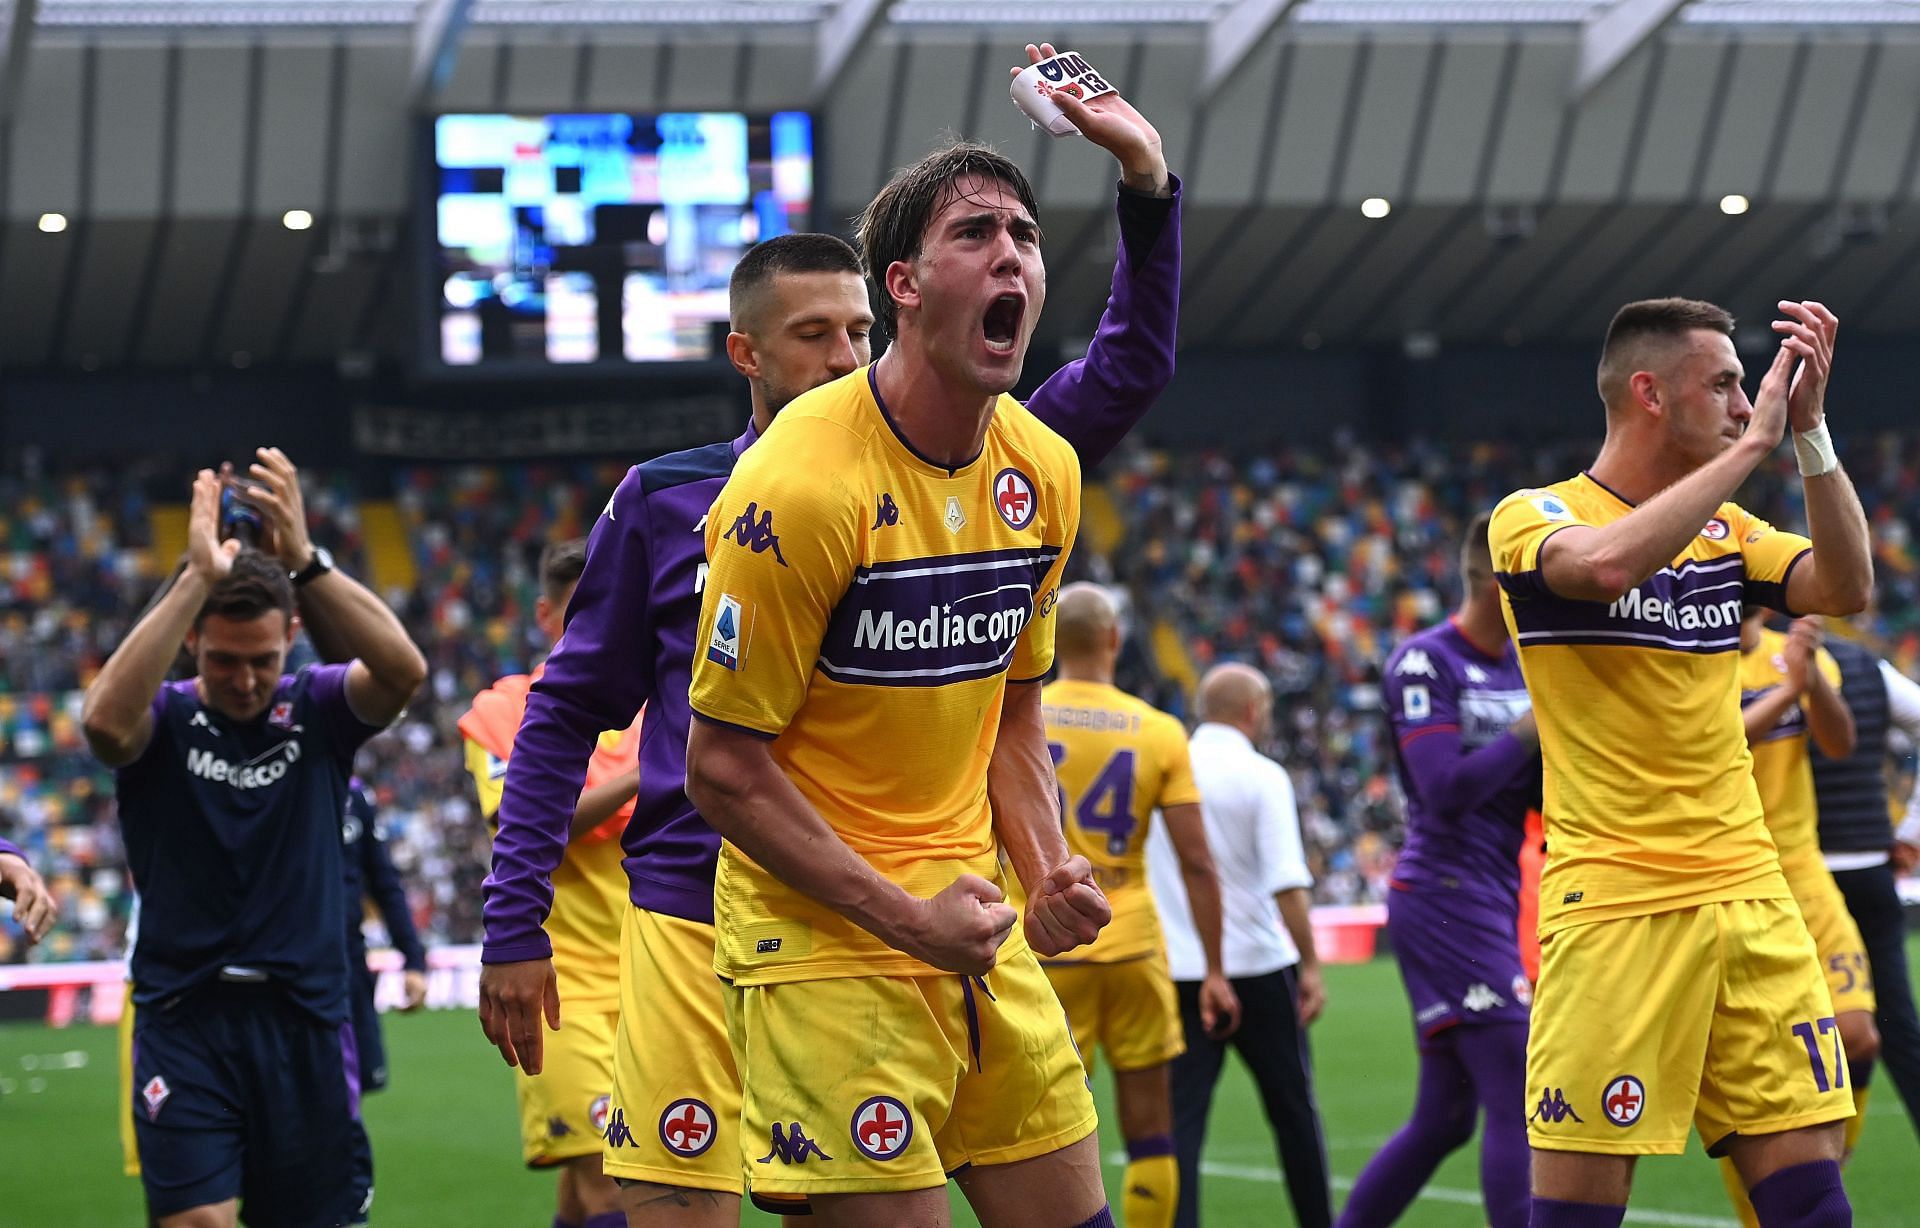 Fiorentina play Udinese on Thursday in Serie A